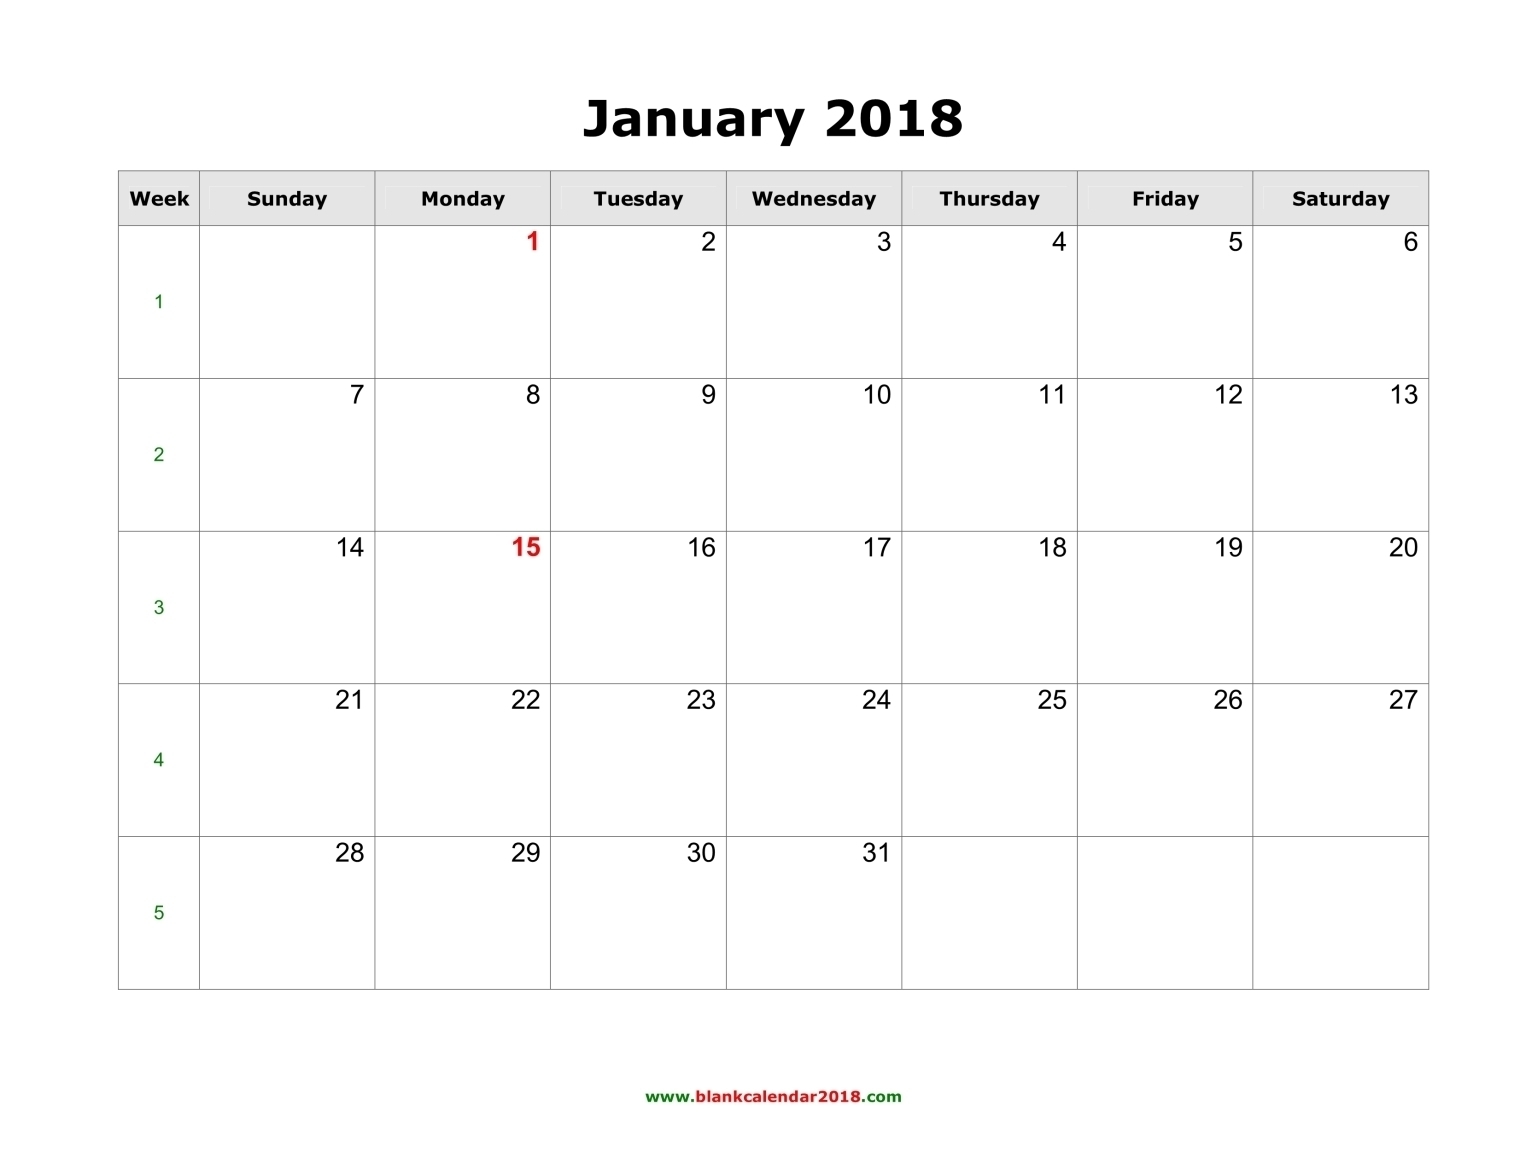 Blank Calendar 2018 throughout Free Blank Calendars By Month